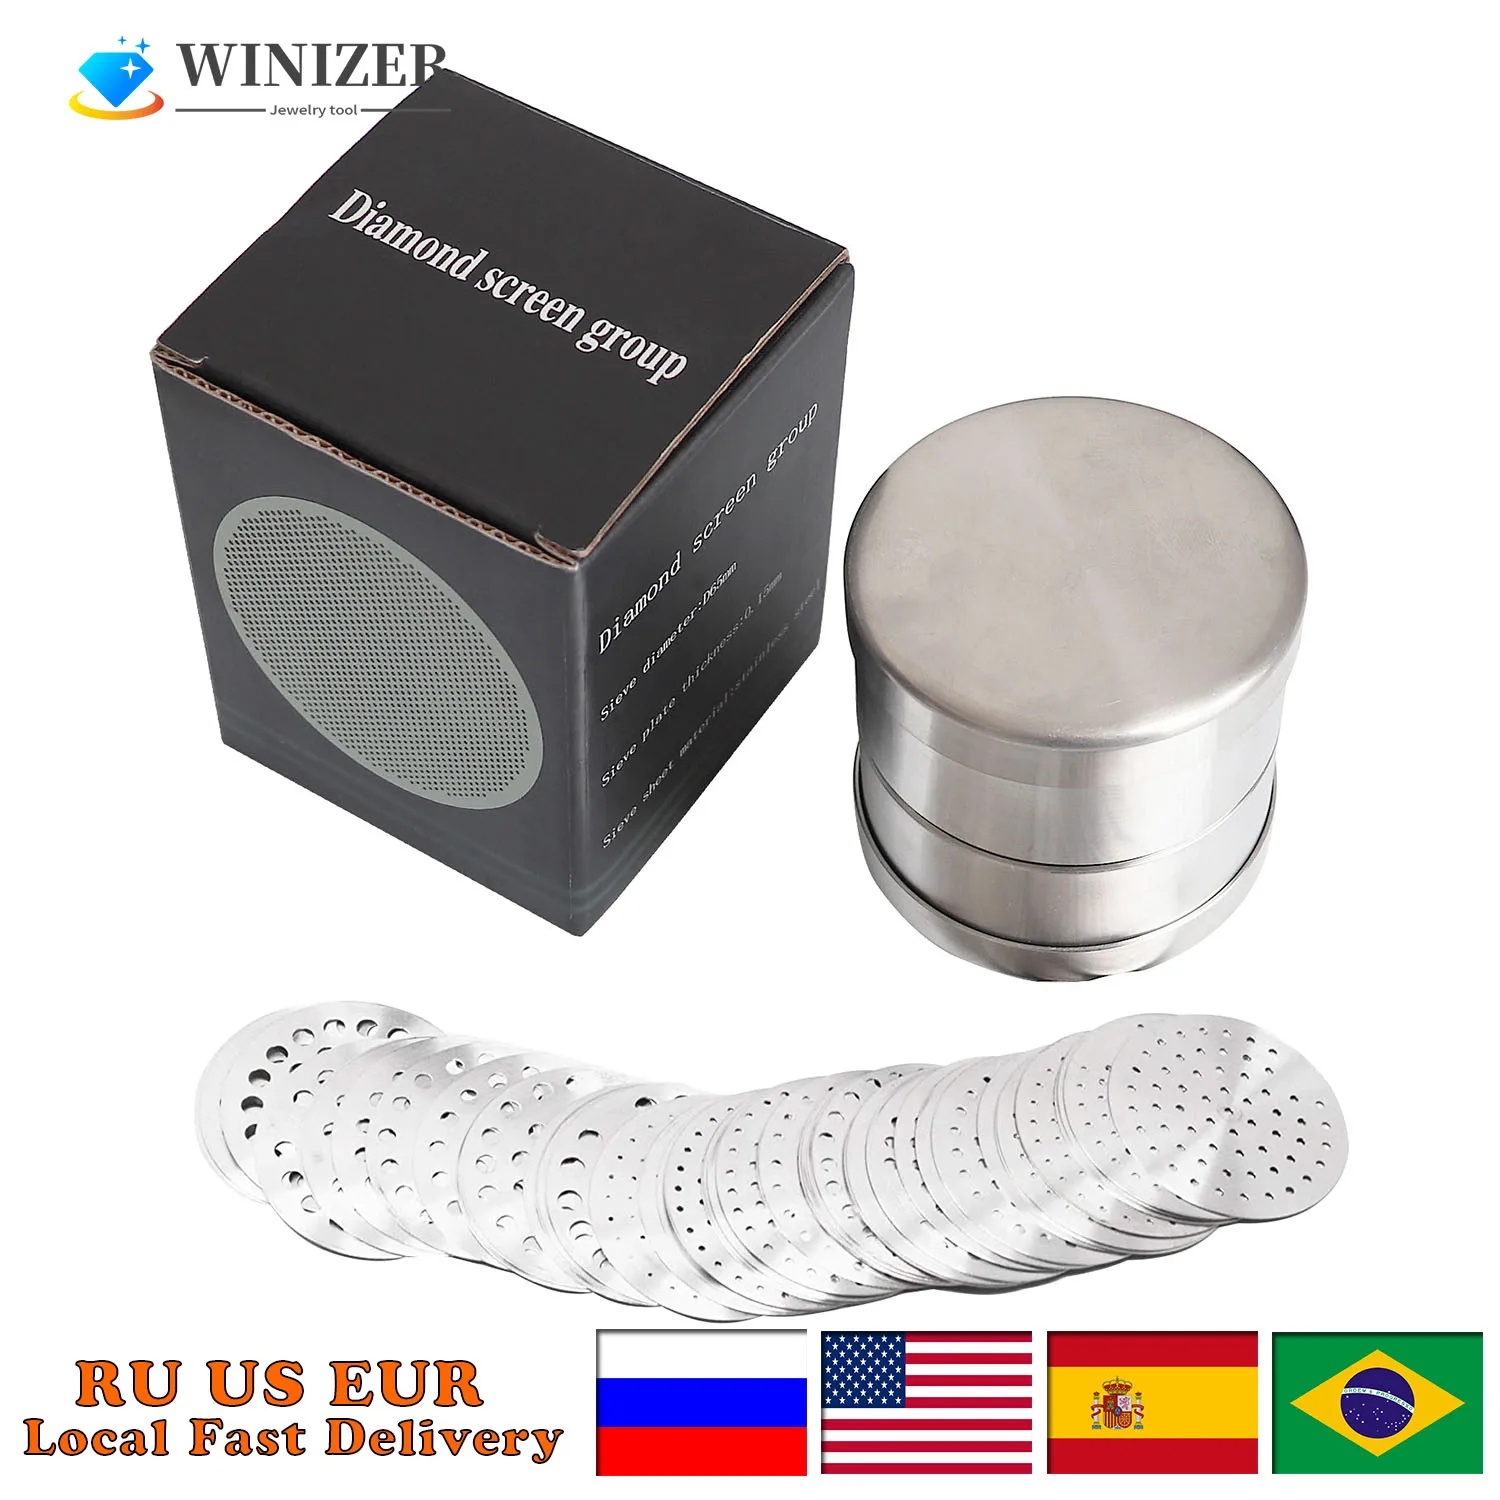 Stainless Steel Diamond Sieve Set for Jewelry Sizing and Stone Selection Perfect for Screening Loose Stones Diamond Inlays  Size